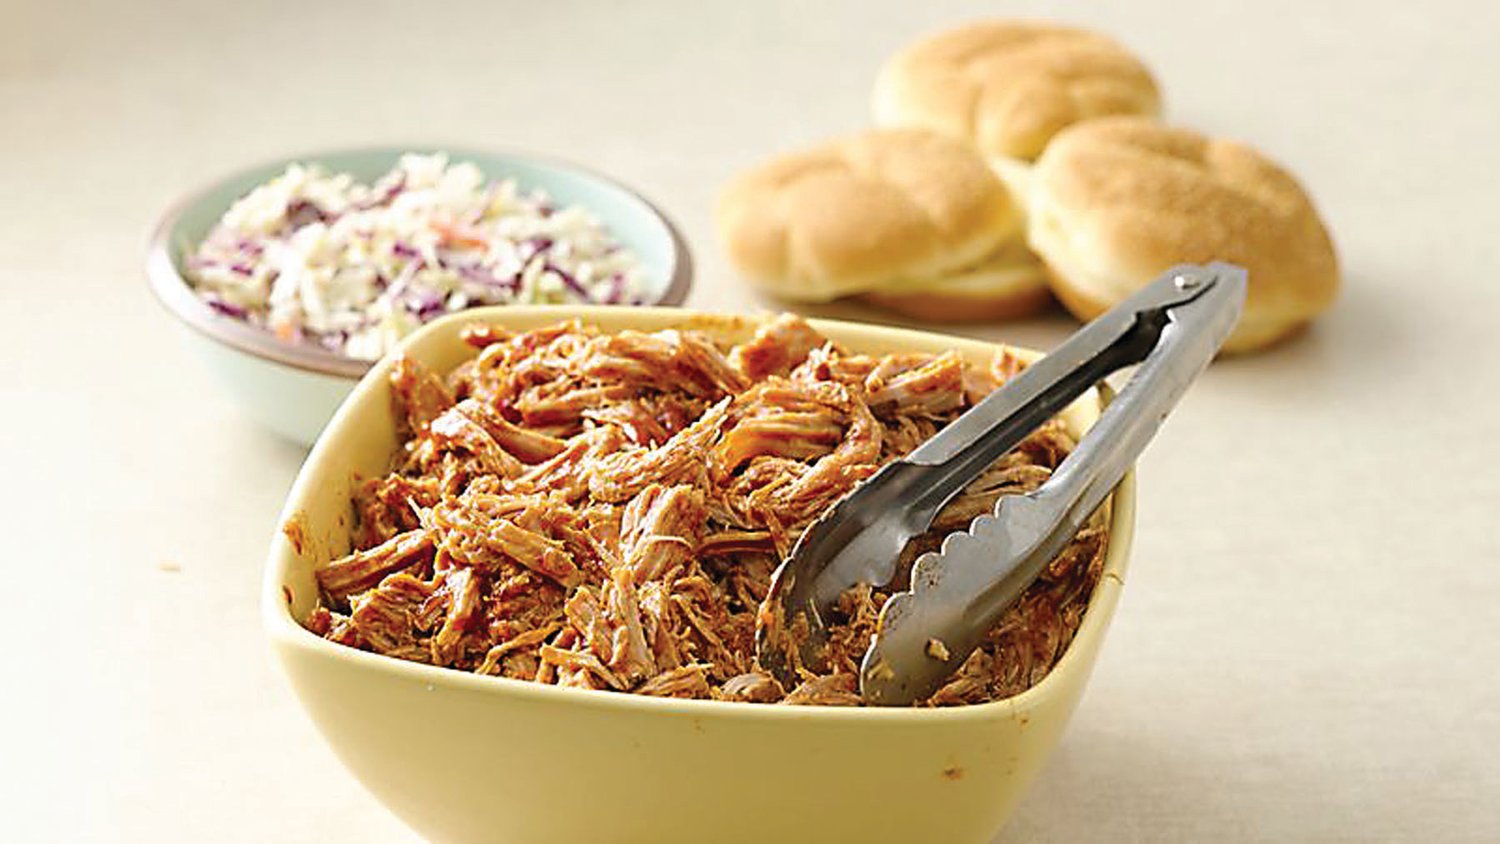 Pulled pork like the popular dish served at Coca-Cola Park can be easy to make at home.